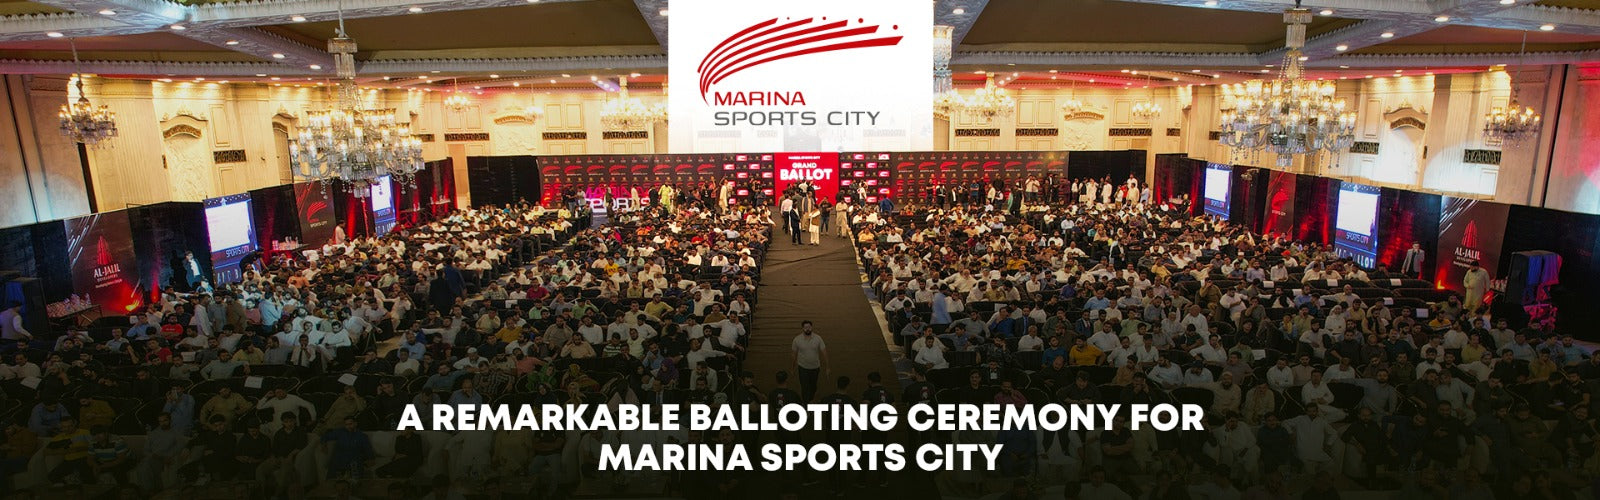 A Remarkable Balloting Ceremony for Marina Sports City: Al-Jalil Developers